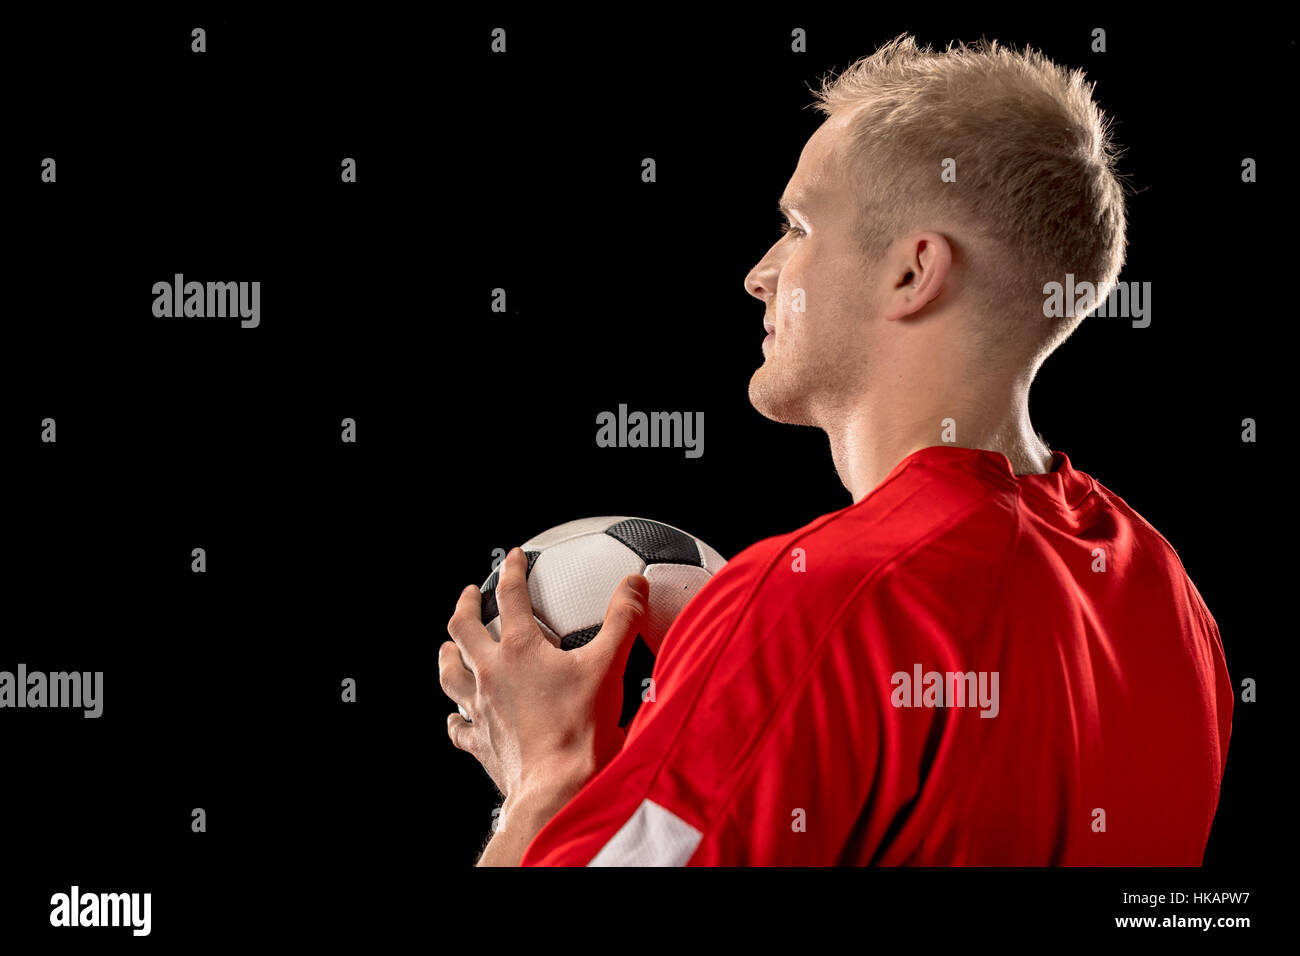 Soccer player holding ball Stock Photo